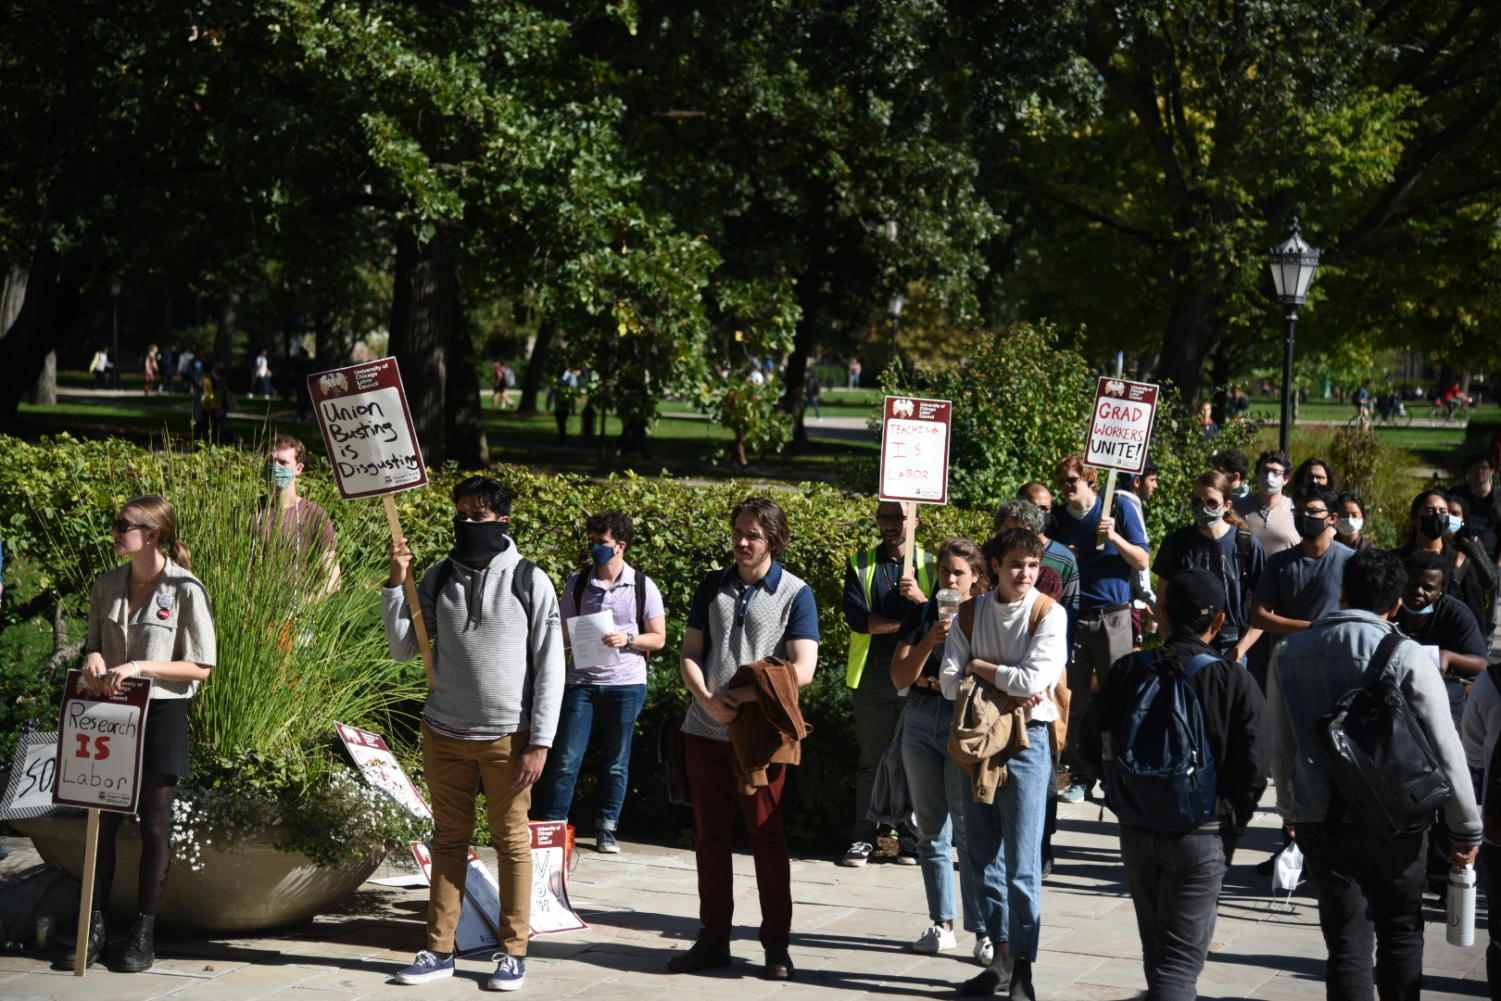 Graduate students and supporters rallying in front of Levi Hall on October 19, 2021